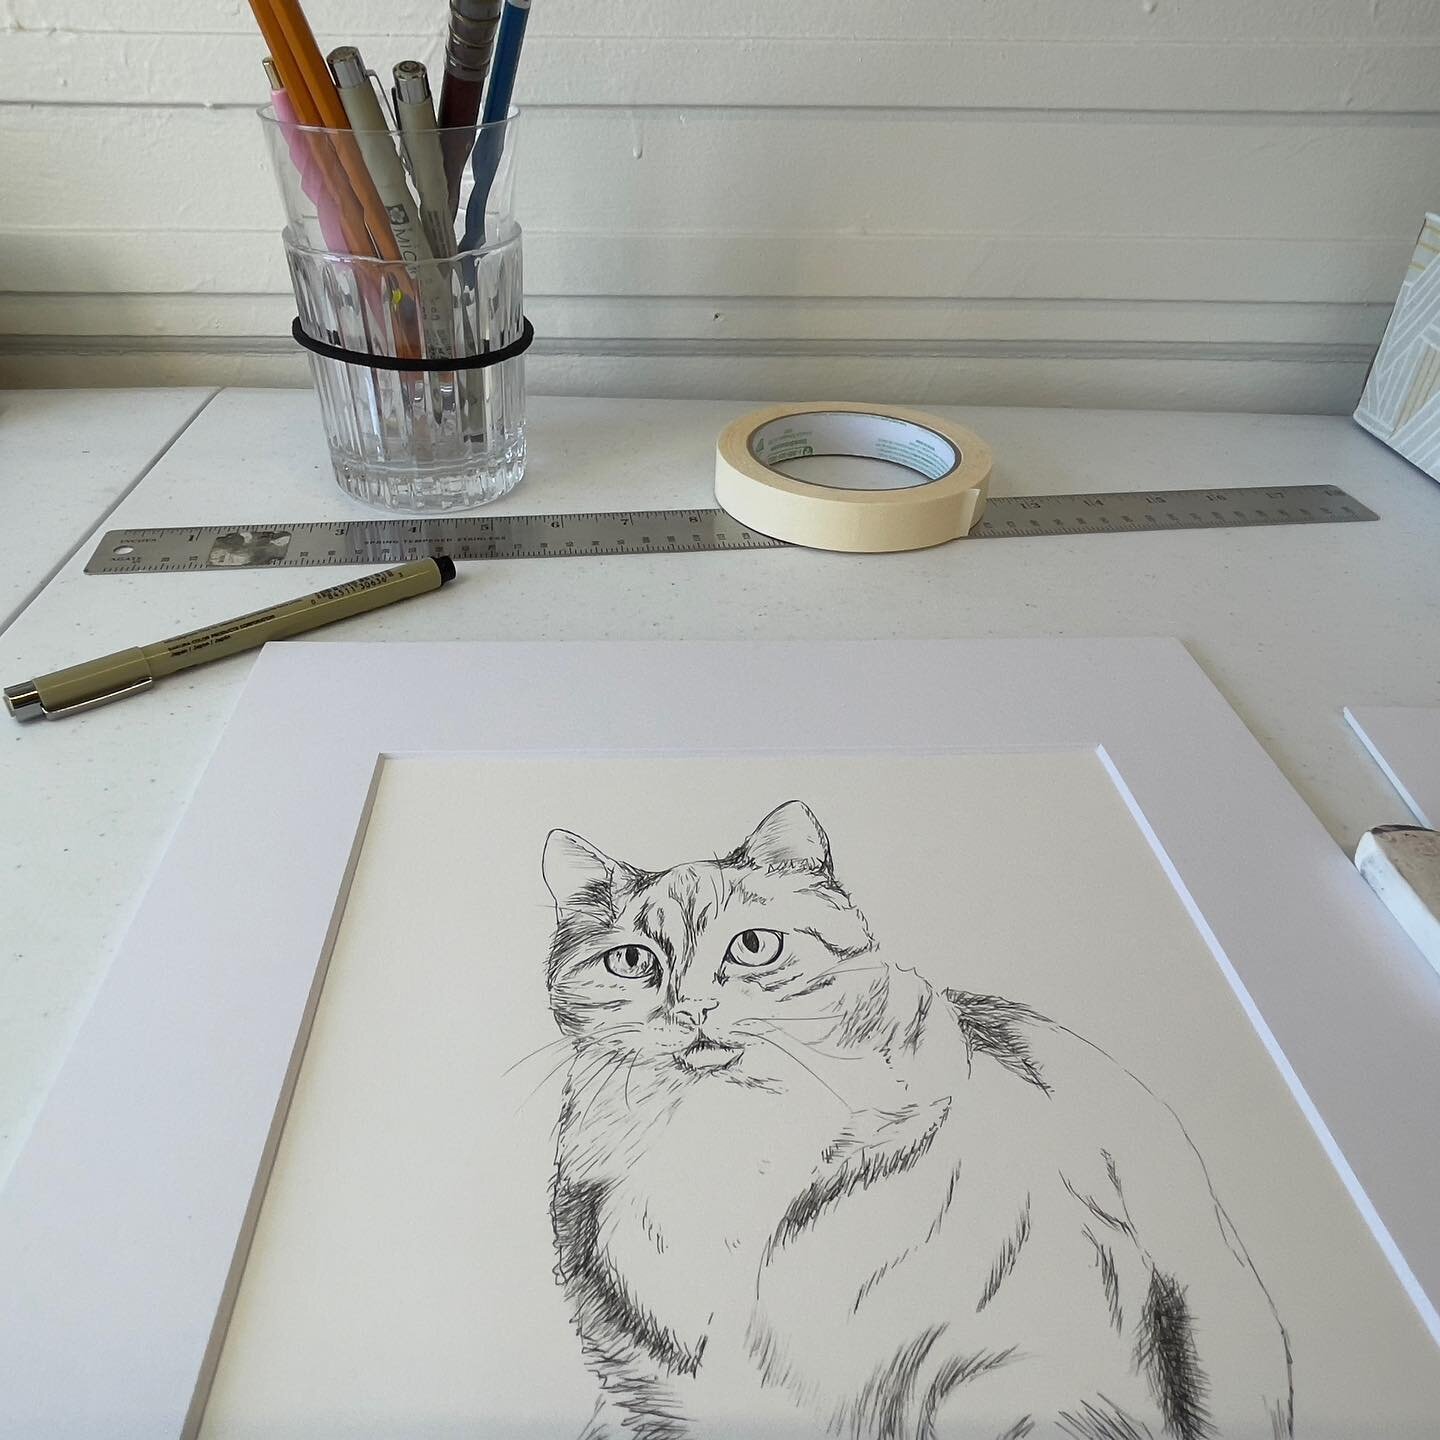 👋 One full day left to order a digital Fetch-a-Sketch just in time for the holidays!
.
.
.
.
.
.
.
.
.
.
.
.
#downloadnow #petportraits #giveart #lastminutegiftideas #easilyprintable #dogdrawings #art #inkdrawing #animalart #catportrait